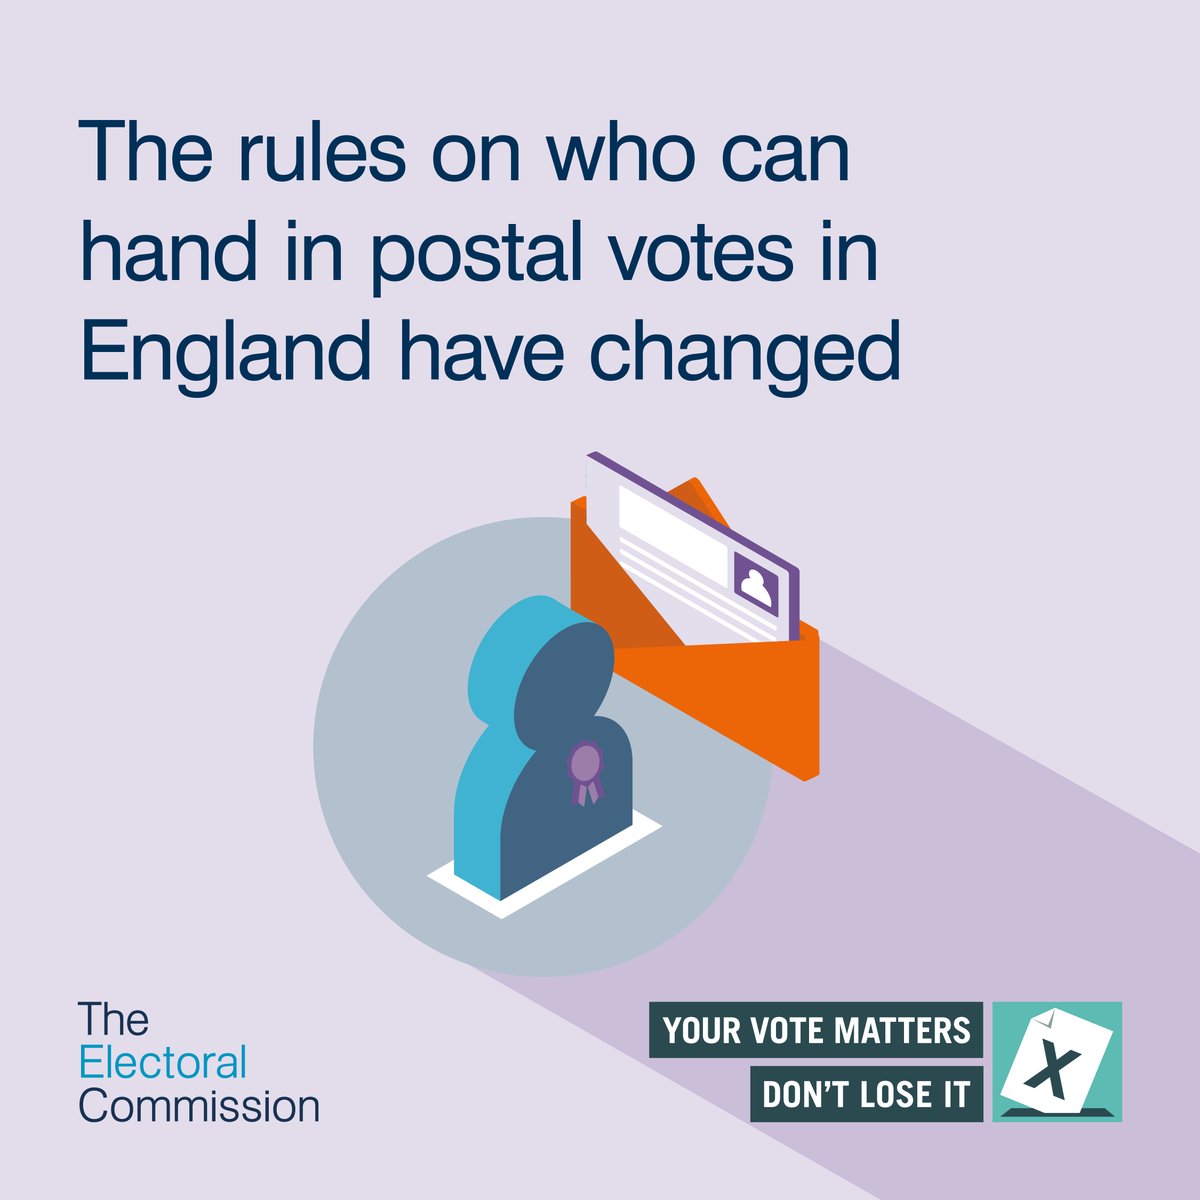 Handing in postal votes at a polling station? There are now limits to how many people you can do this for. If you're a political party or campaigner, you can now only do this for certain people. Find out more: electoralcommission.org.uk/waystovote #GetReadyToVote